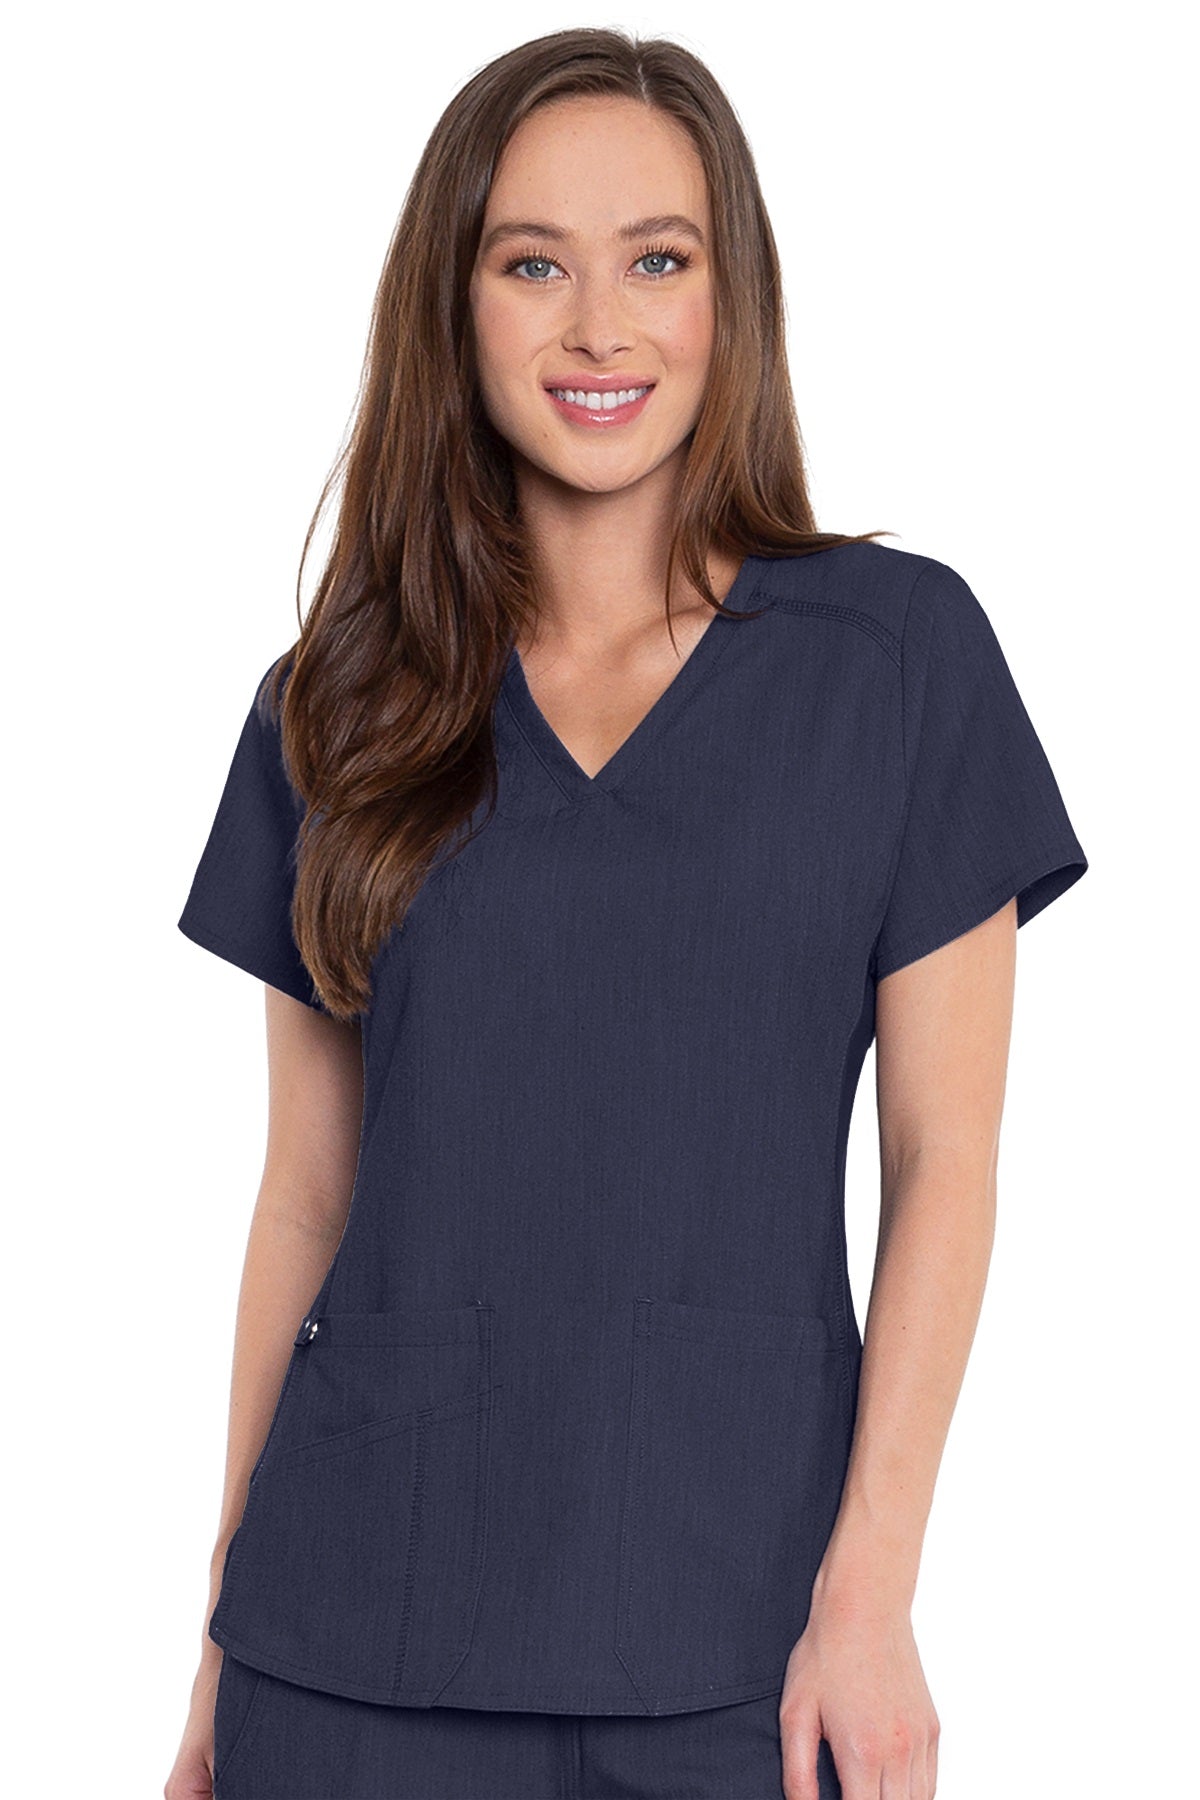 Med Couture Scrub Top Touch Shirttail V-Neck in Indigo Heather at Parker's Clothing and Shoes.